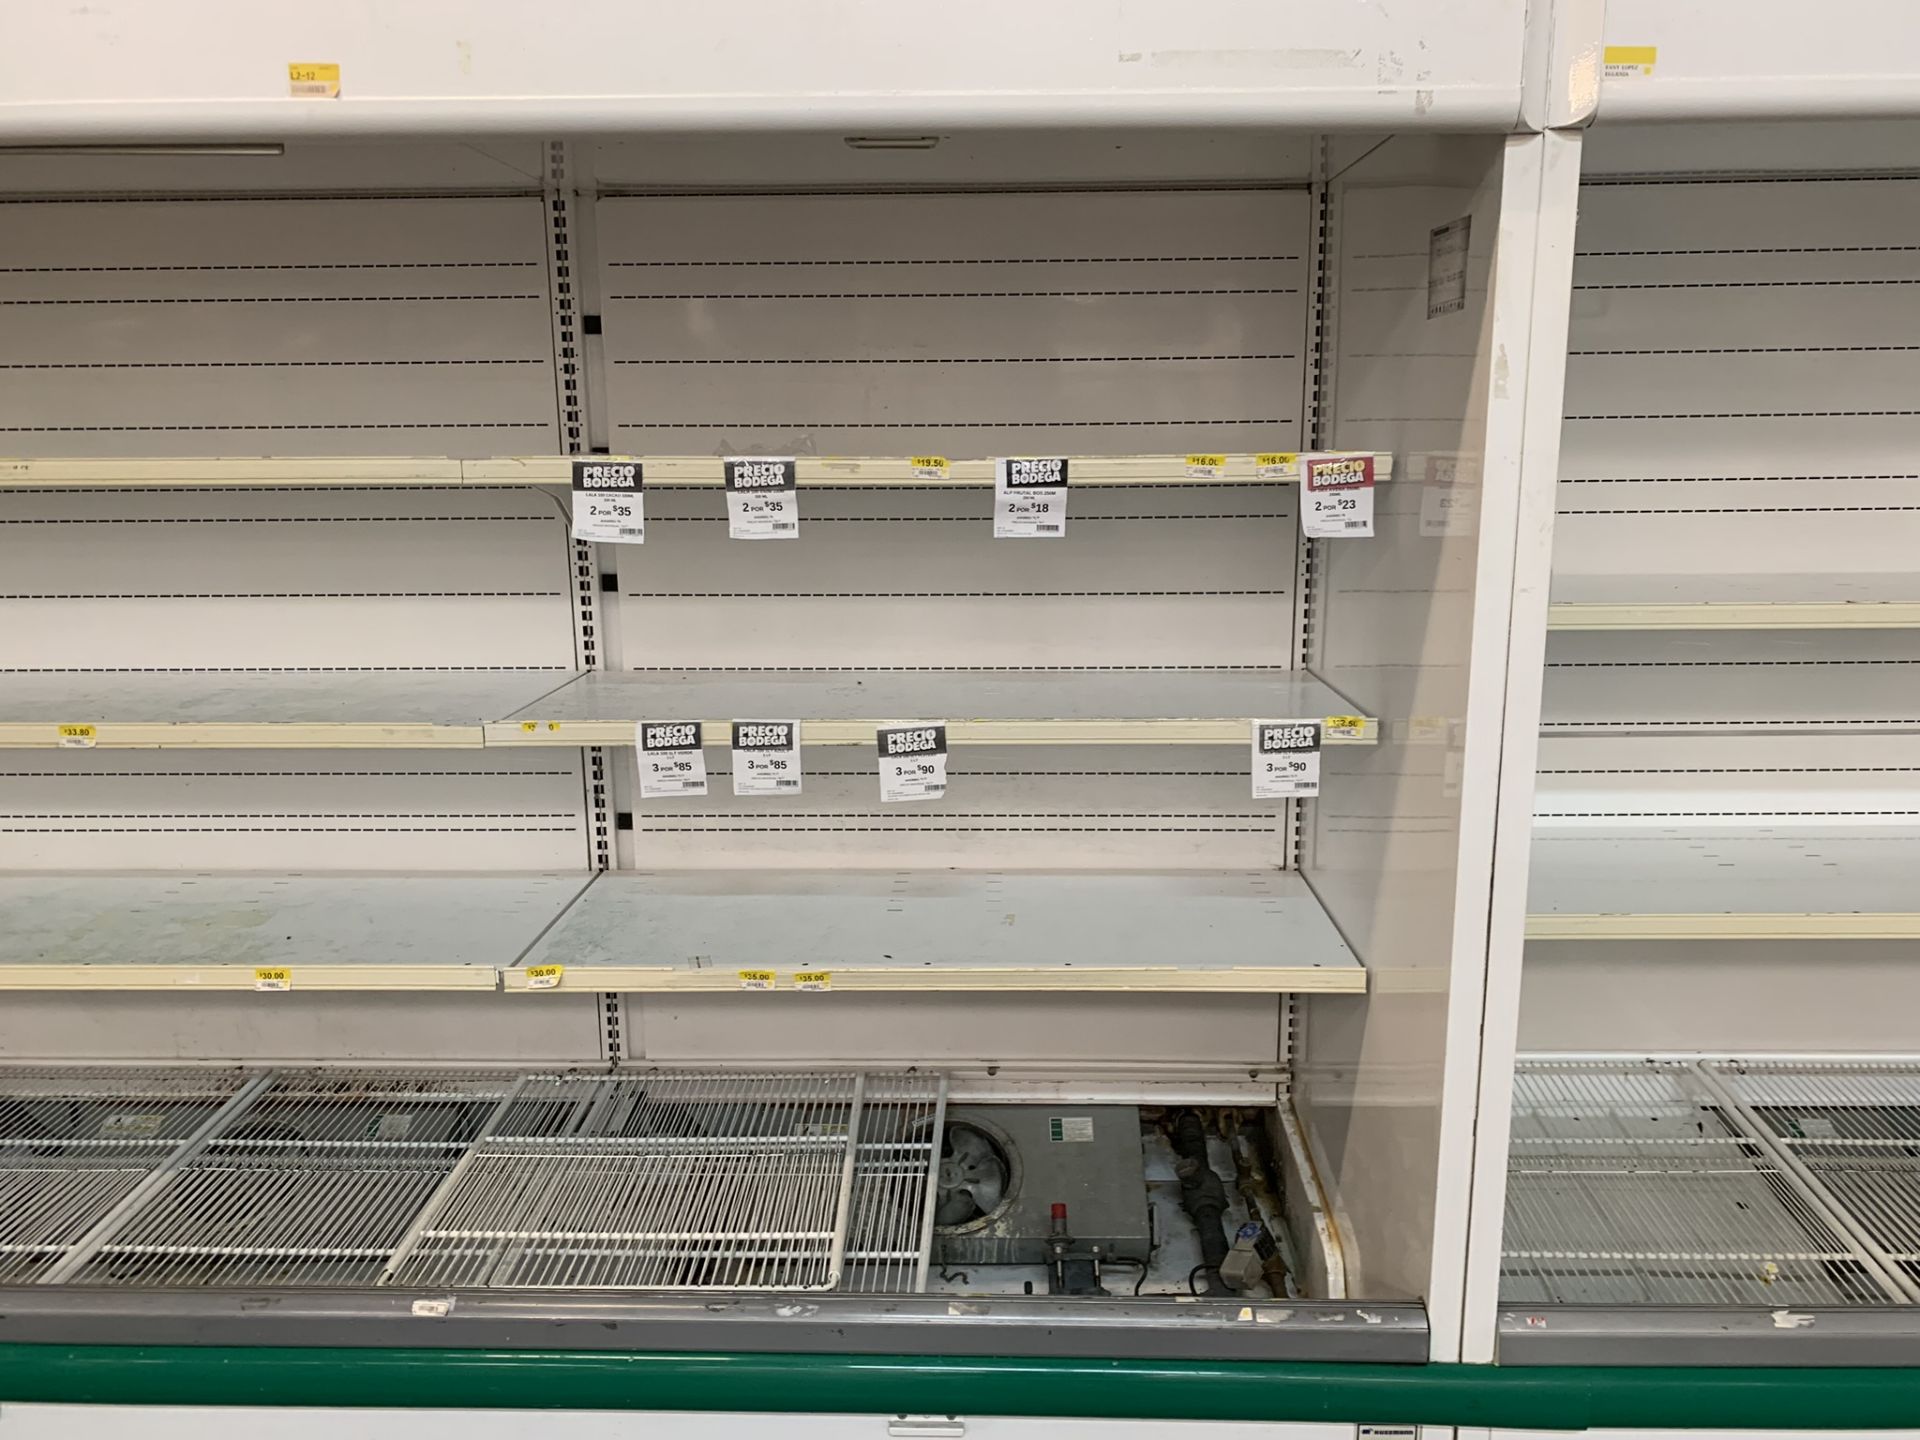 Hussmann refrigerated display case with 4 sections, measures 14.77 x 1.03 x 1.99 meters - Image 4 of 36